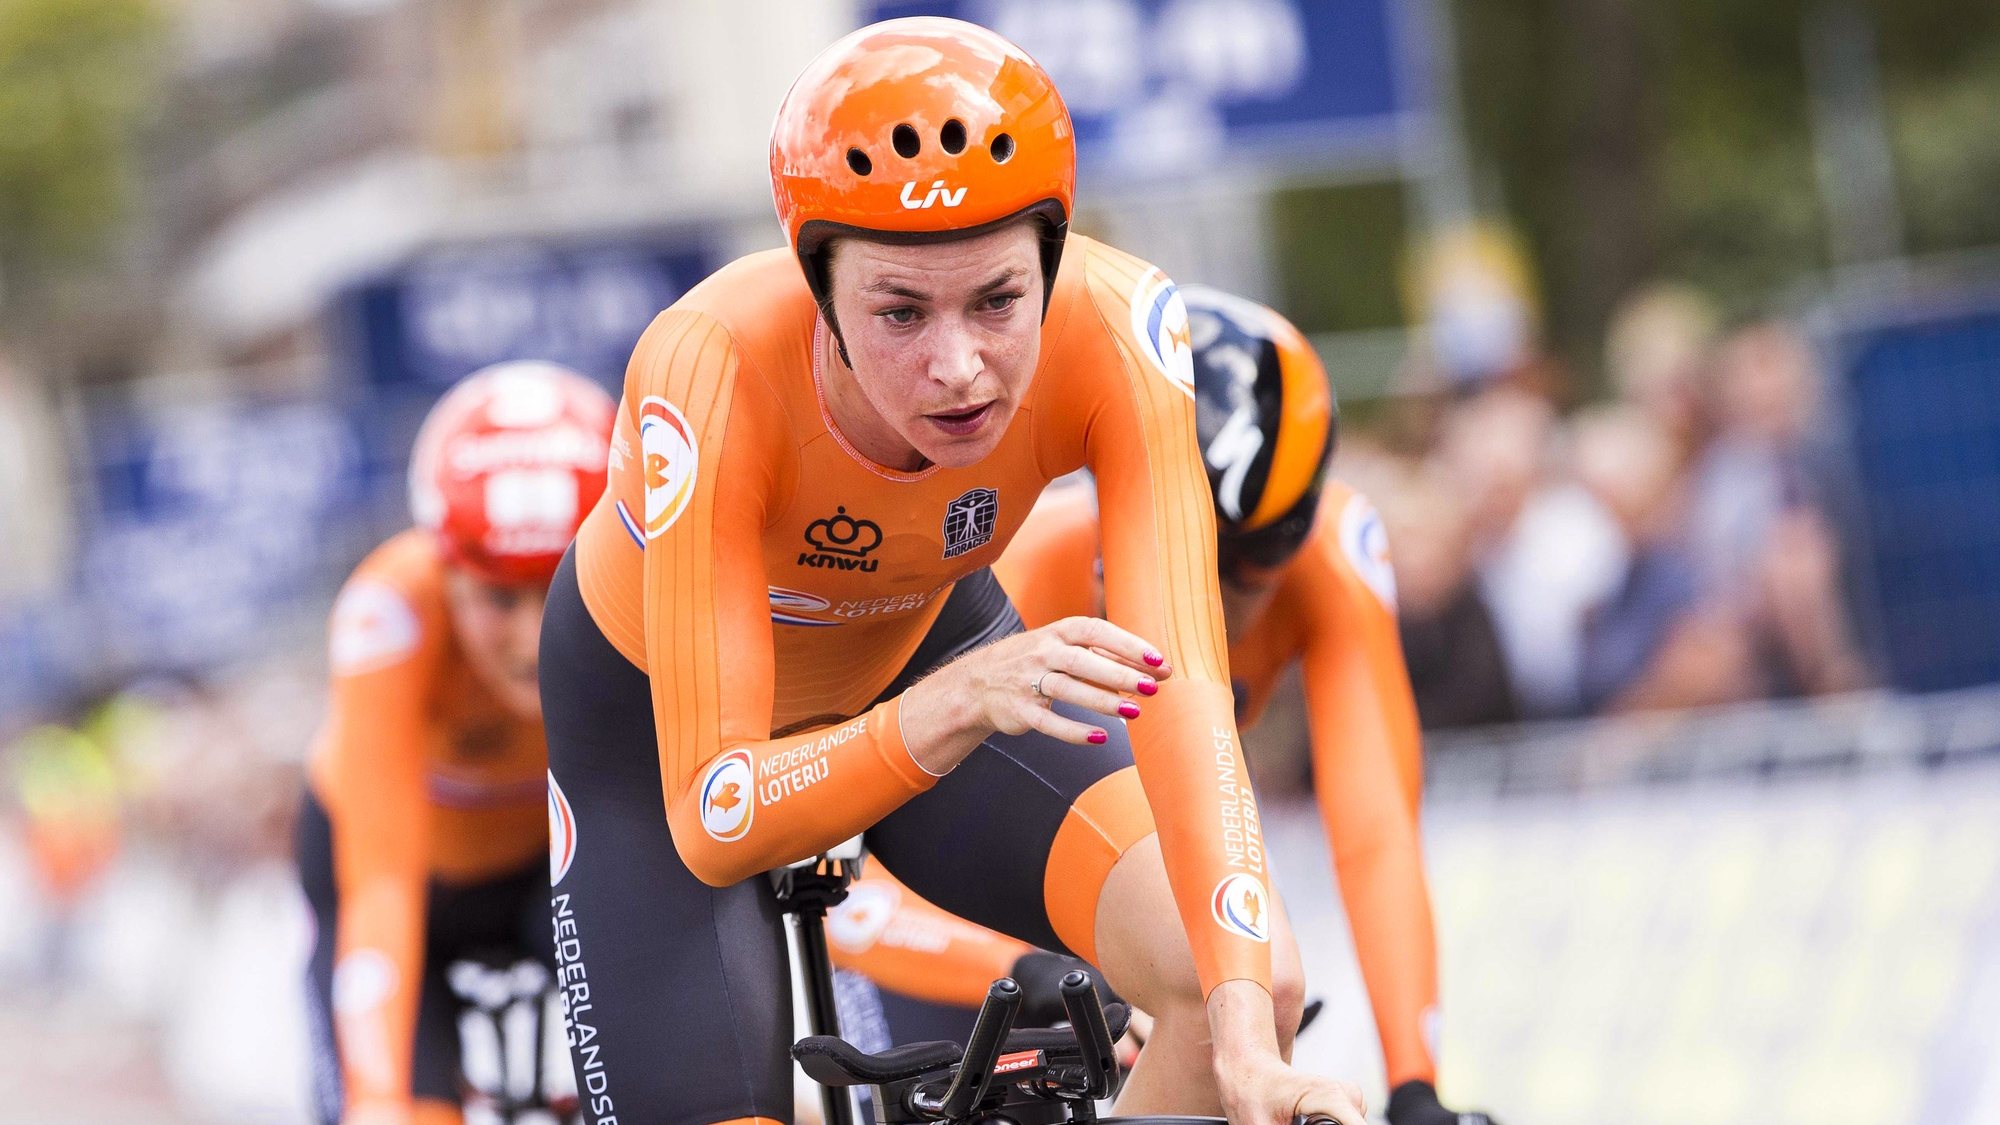 epa07760774 Dutch rider Amy Pieters (front) crosses the finish line during the Mixed Relay team time trial over 44.8km at the 2019 UEC Road Cycling European Championships in Alkmaar, Netherlands, 07 August 2019. The Dutch team won the gold medal.  EPA/VINCENT JANNINK